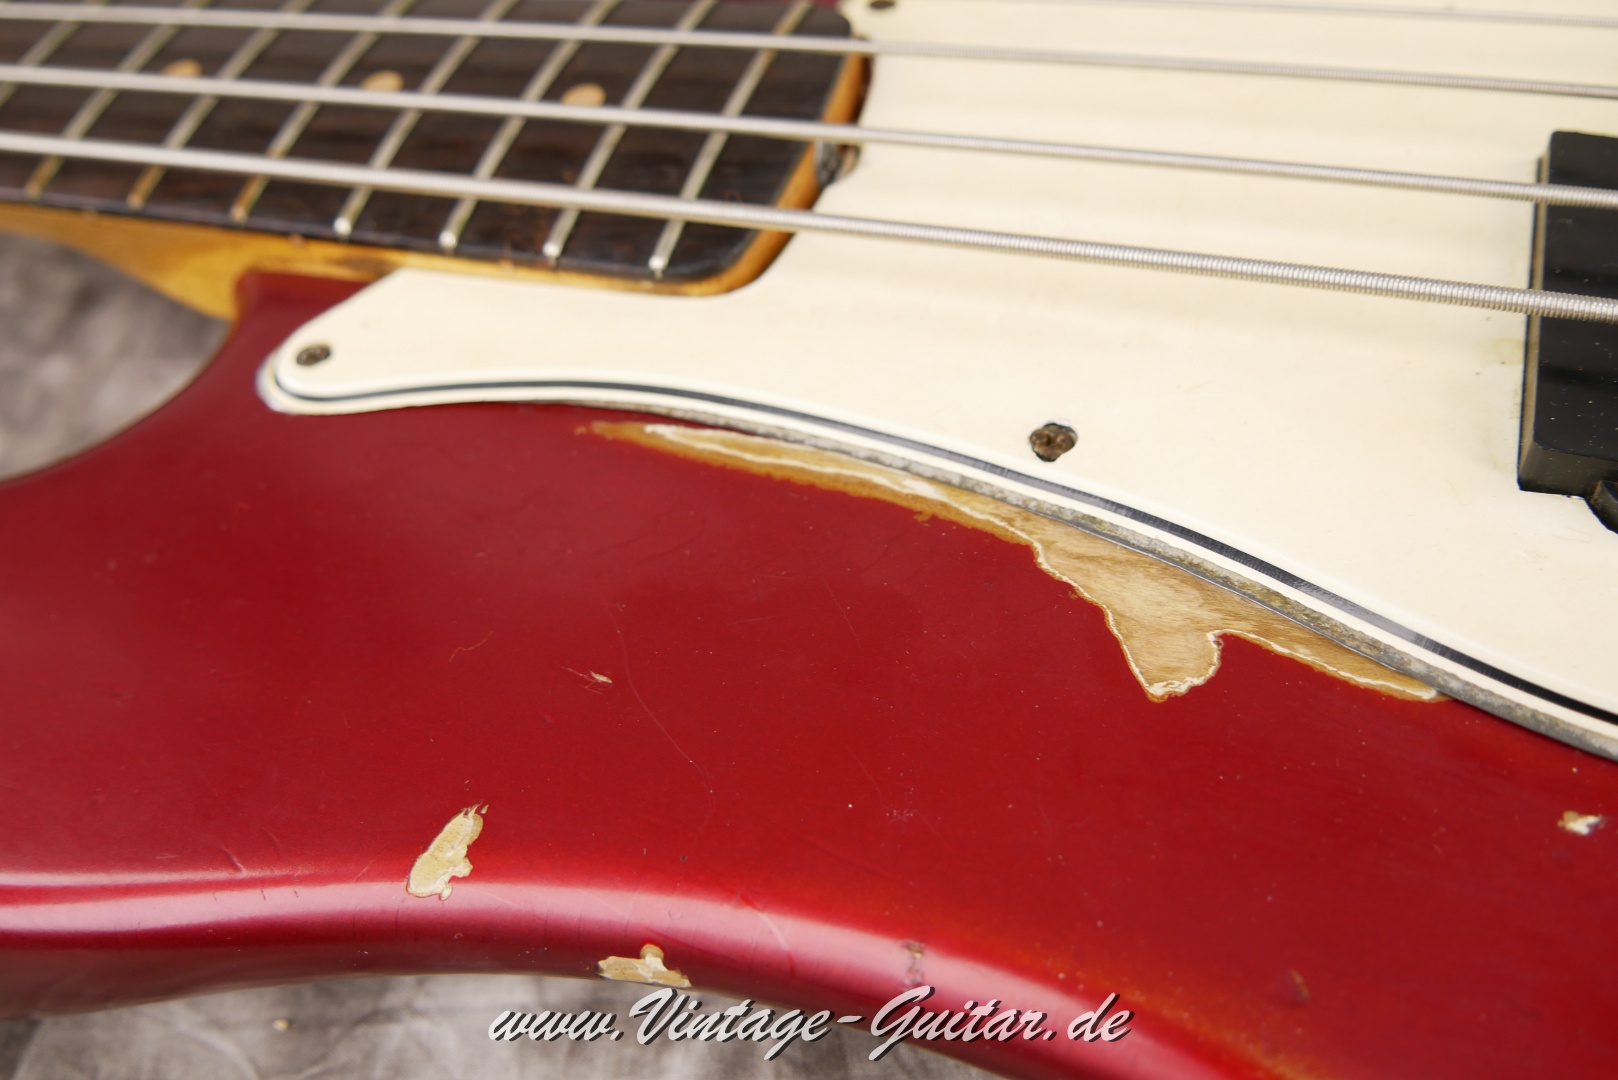 Fender-Precision-Bass-1963-candy-apple-red-018.JPG